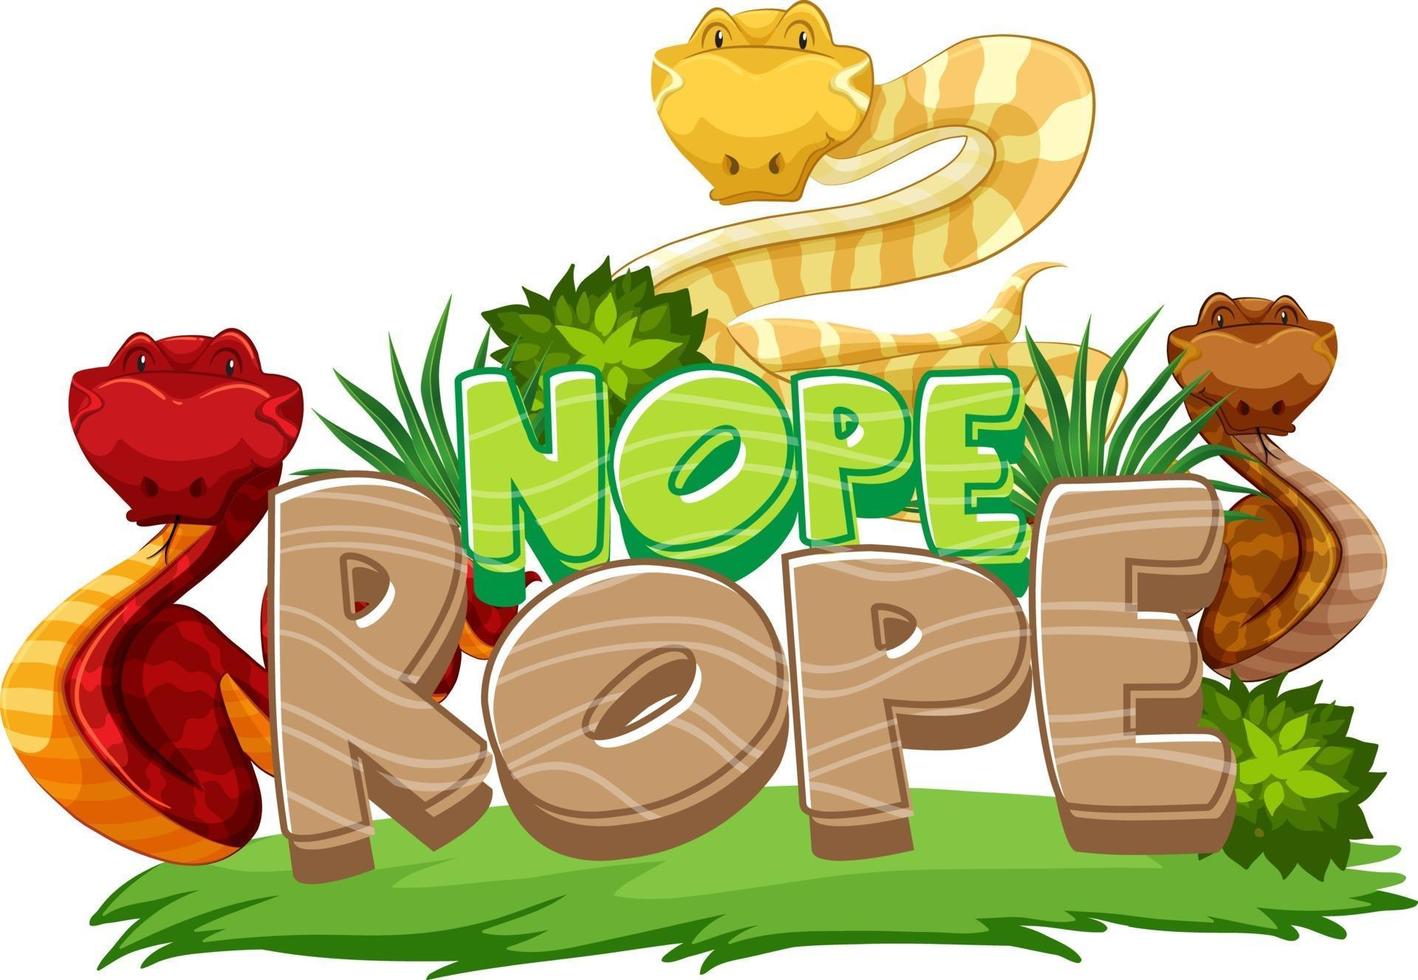 Many Snakes cartoon character with Nope Rope font banner isolated vector